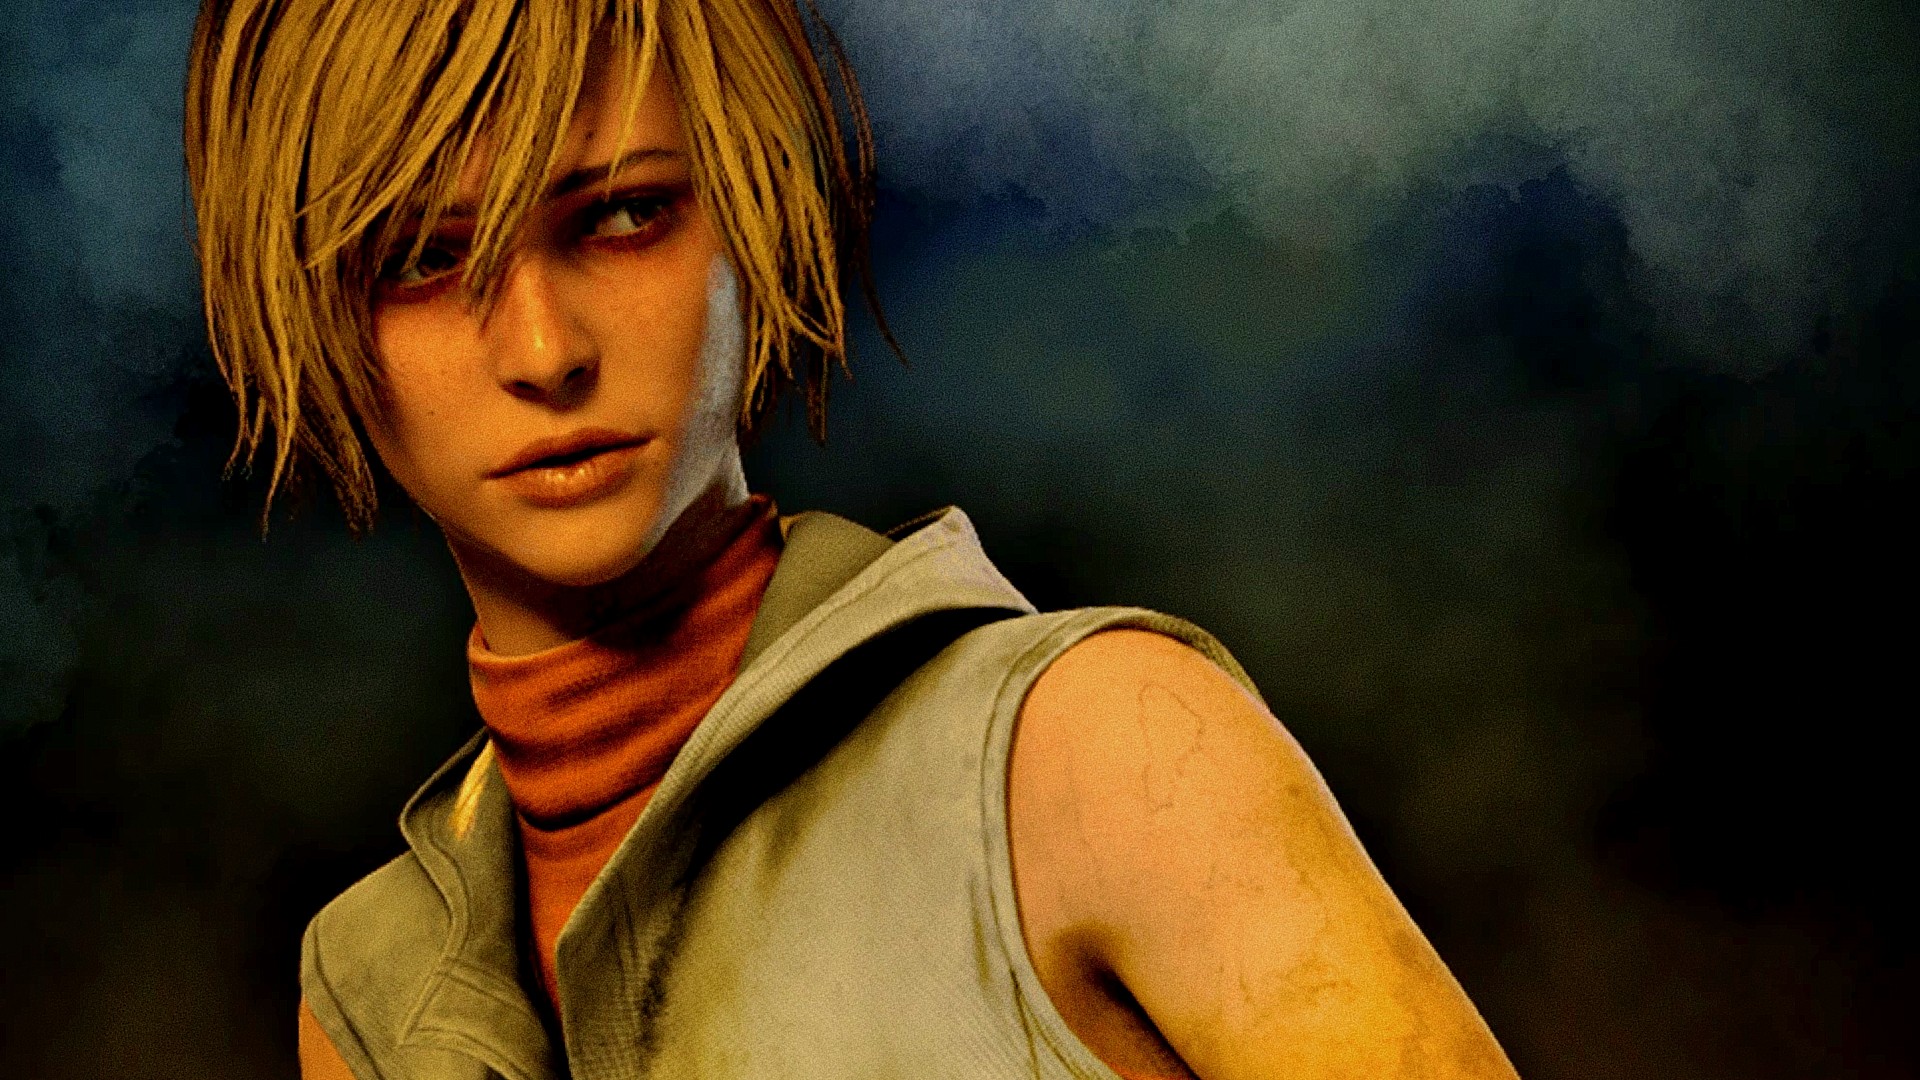 Silent Hill director says Konami has “several” games in the works